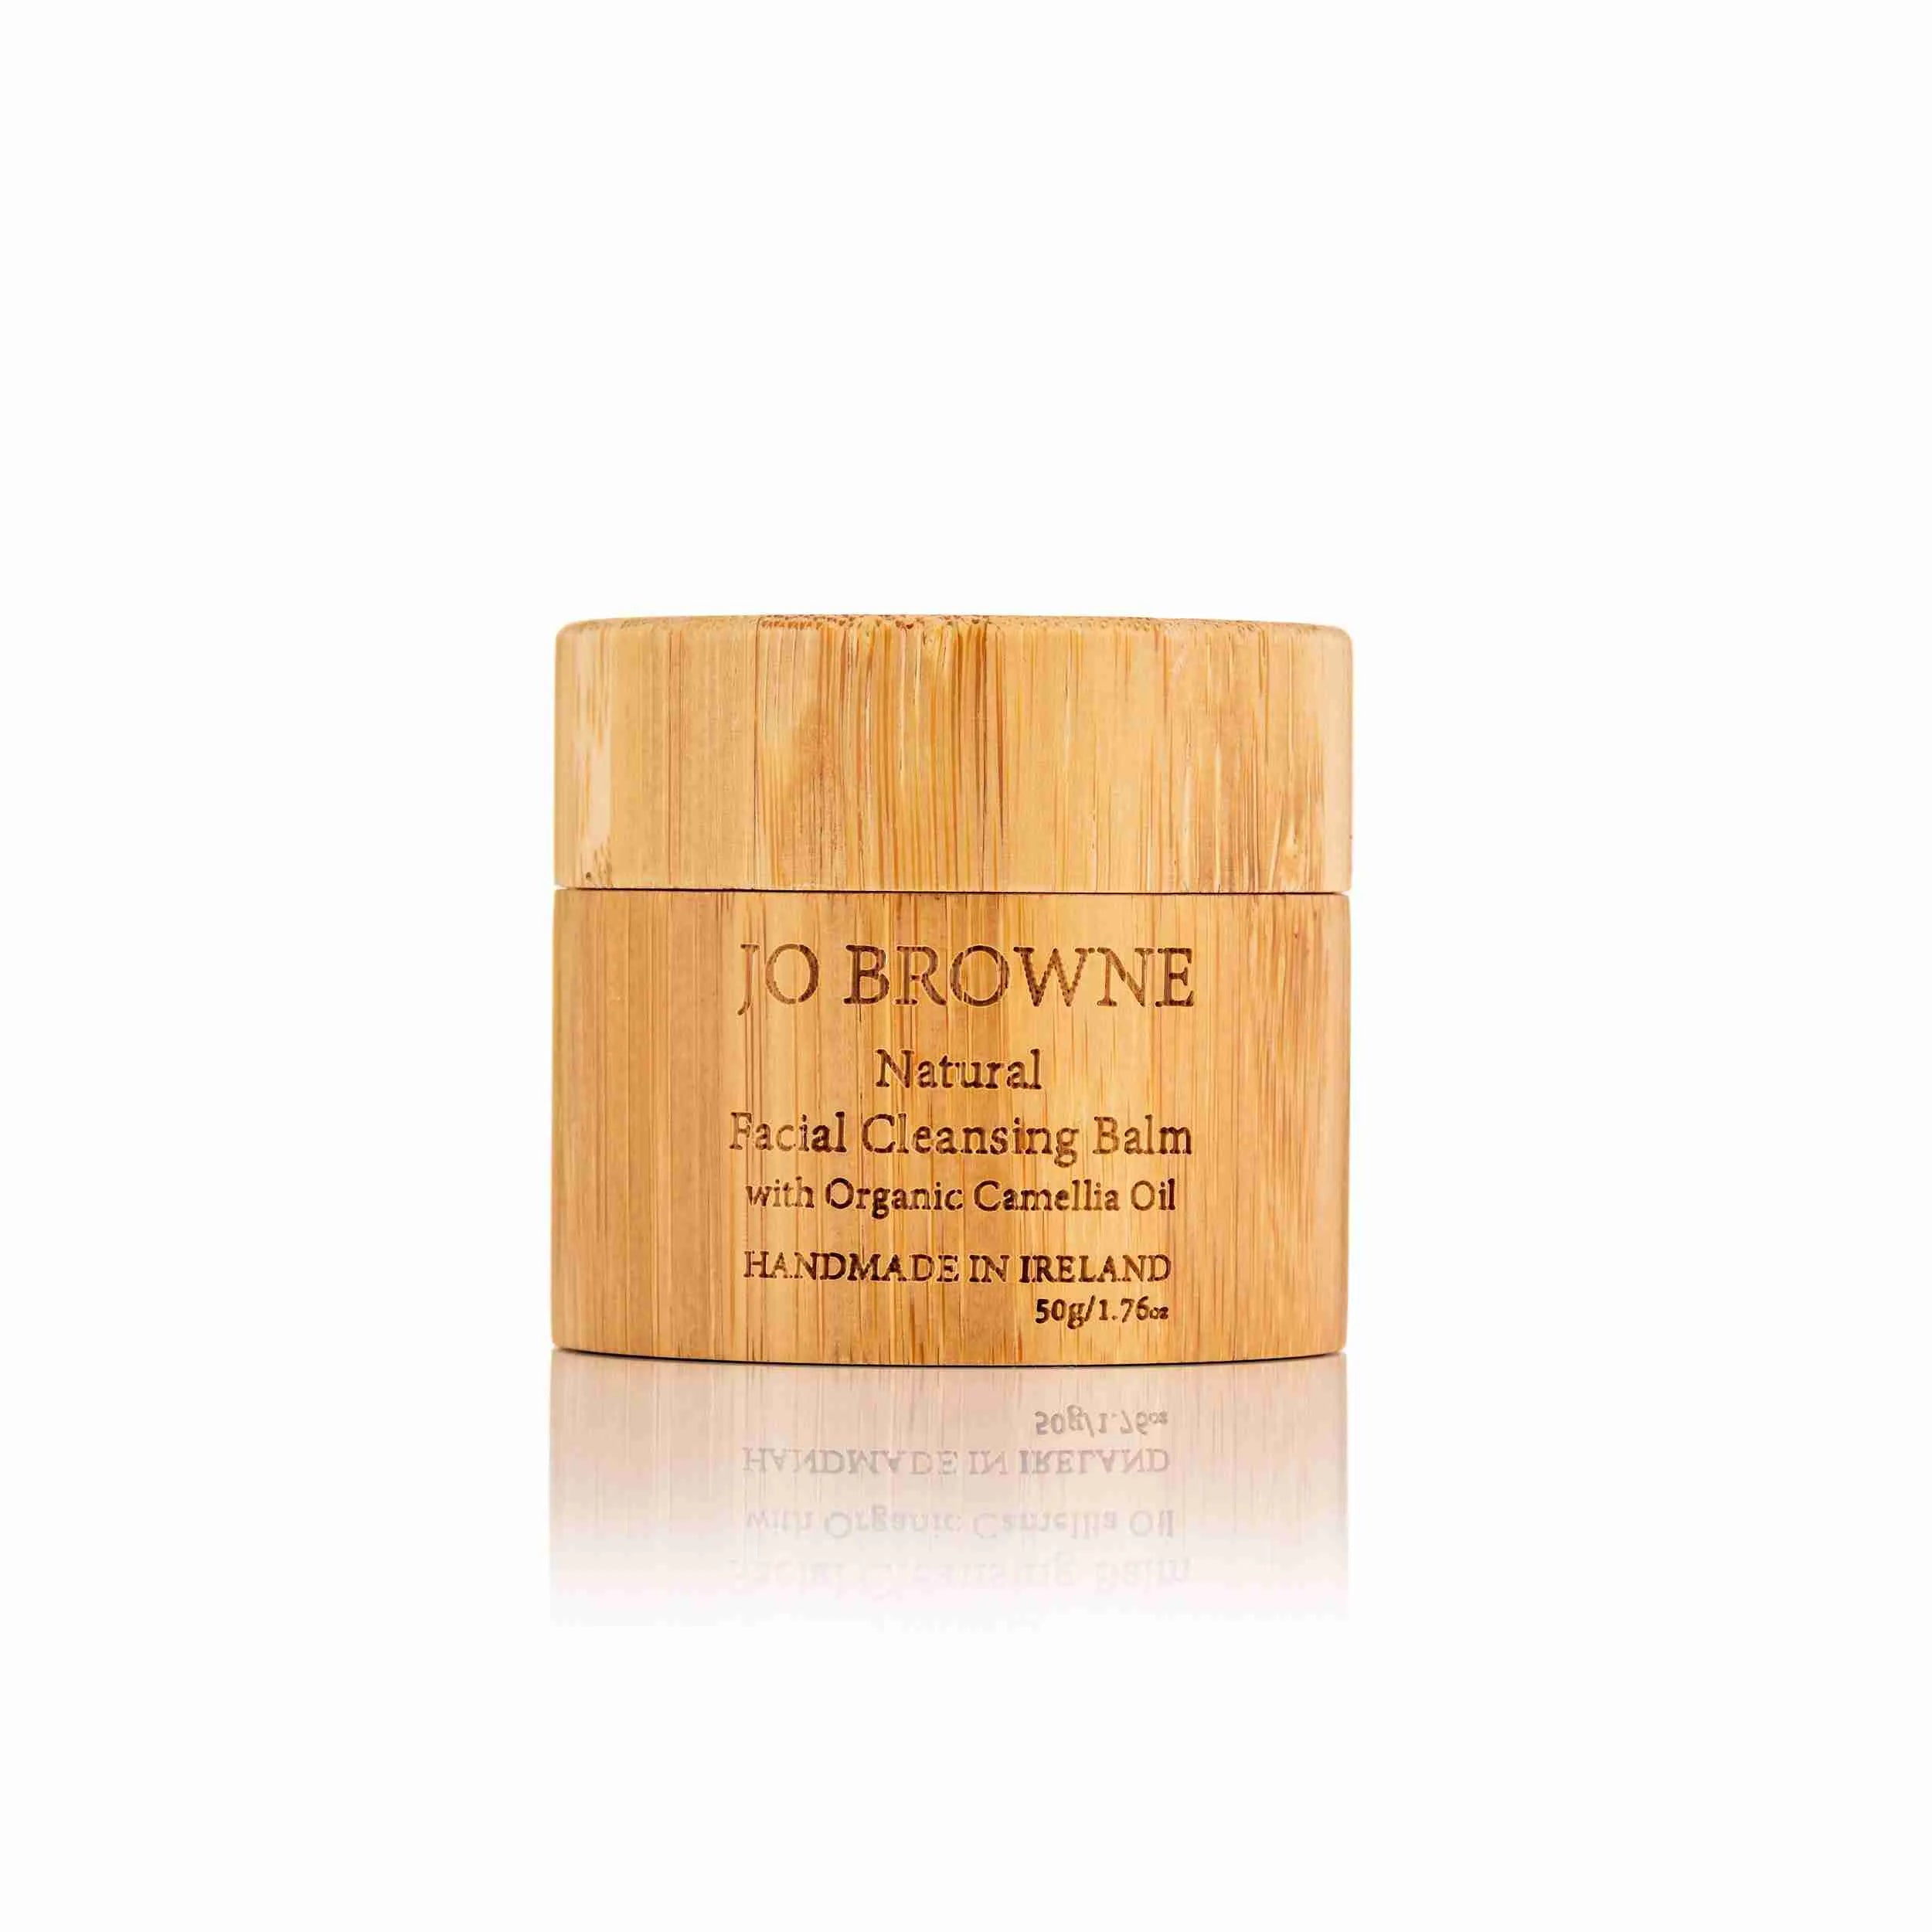 Jo Browne The Gift of Skincare